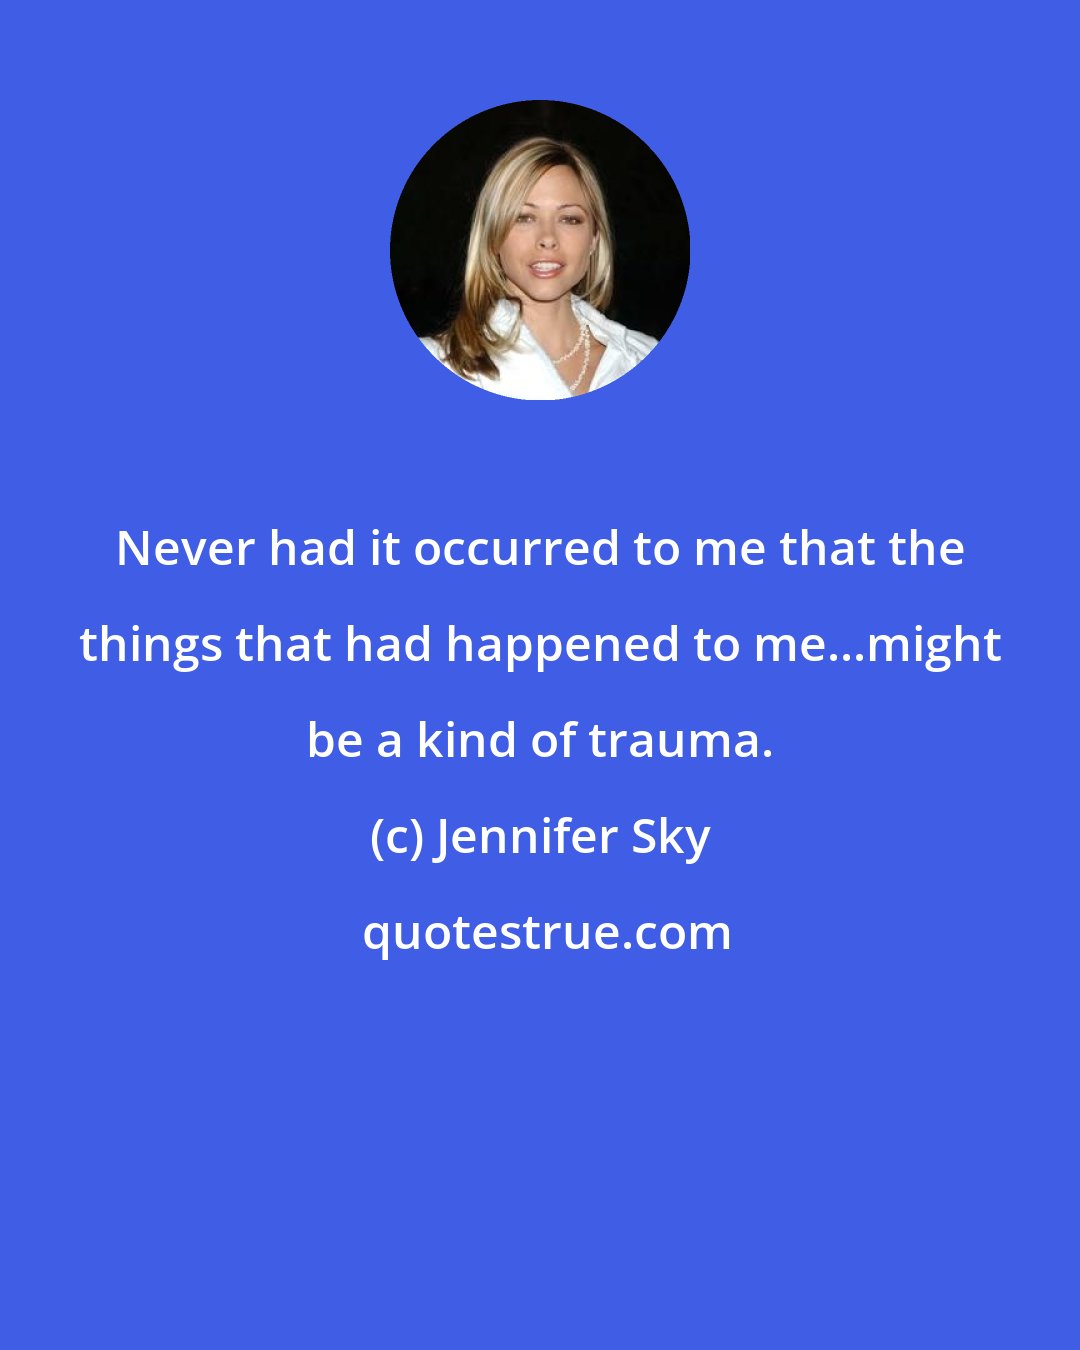 Jennifer Sky: Never had it occurred to me that the things that had happened to me...might be a kind of trauma.